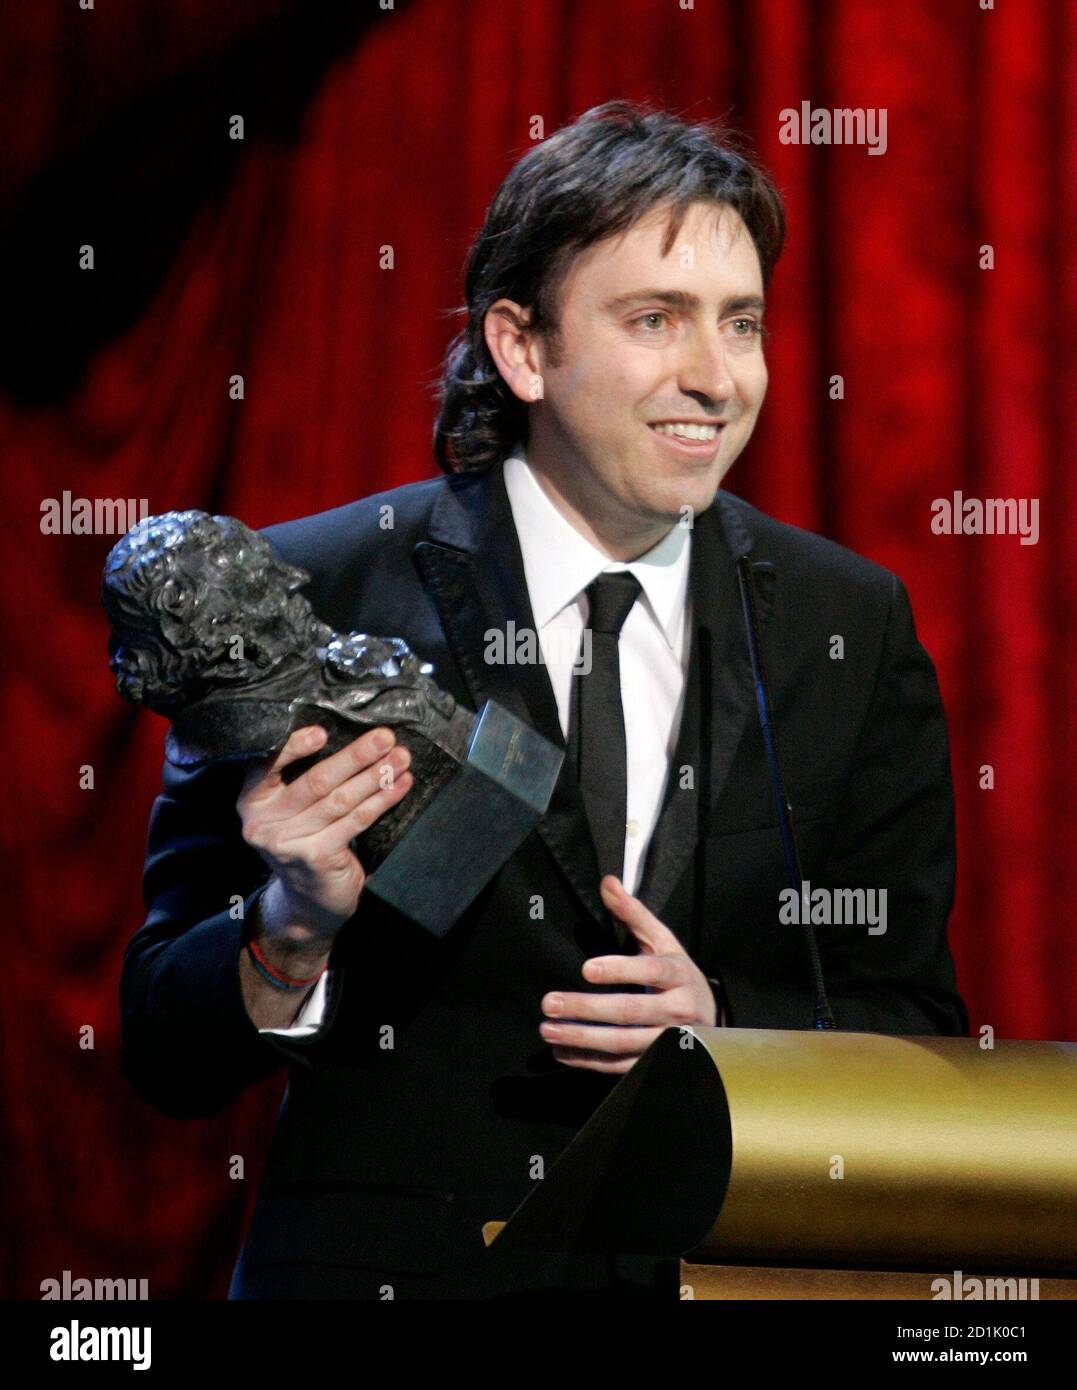 Director Daniel Sanchez Arevalo reacts upon receiving his 'Goya' award during the Spanish Film Academy 'Goya' awards ceremony in Madrid January 28, 2007. Sanchez Arevalo won the Best Upcoming Director award for his movie 'Azul oscuro casi negro'.   REUTERS/Andrea Comas (SPAIN) Stock Photo